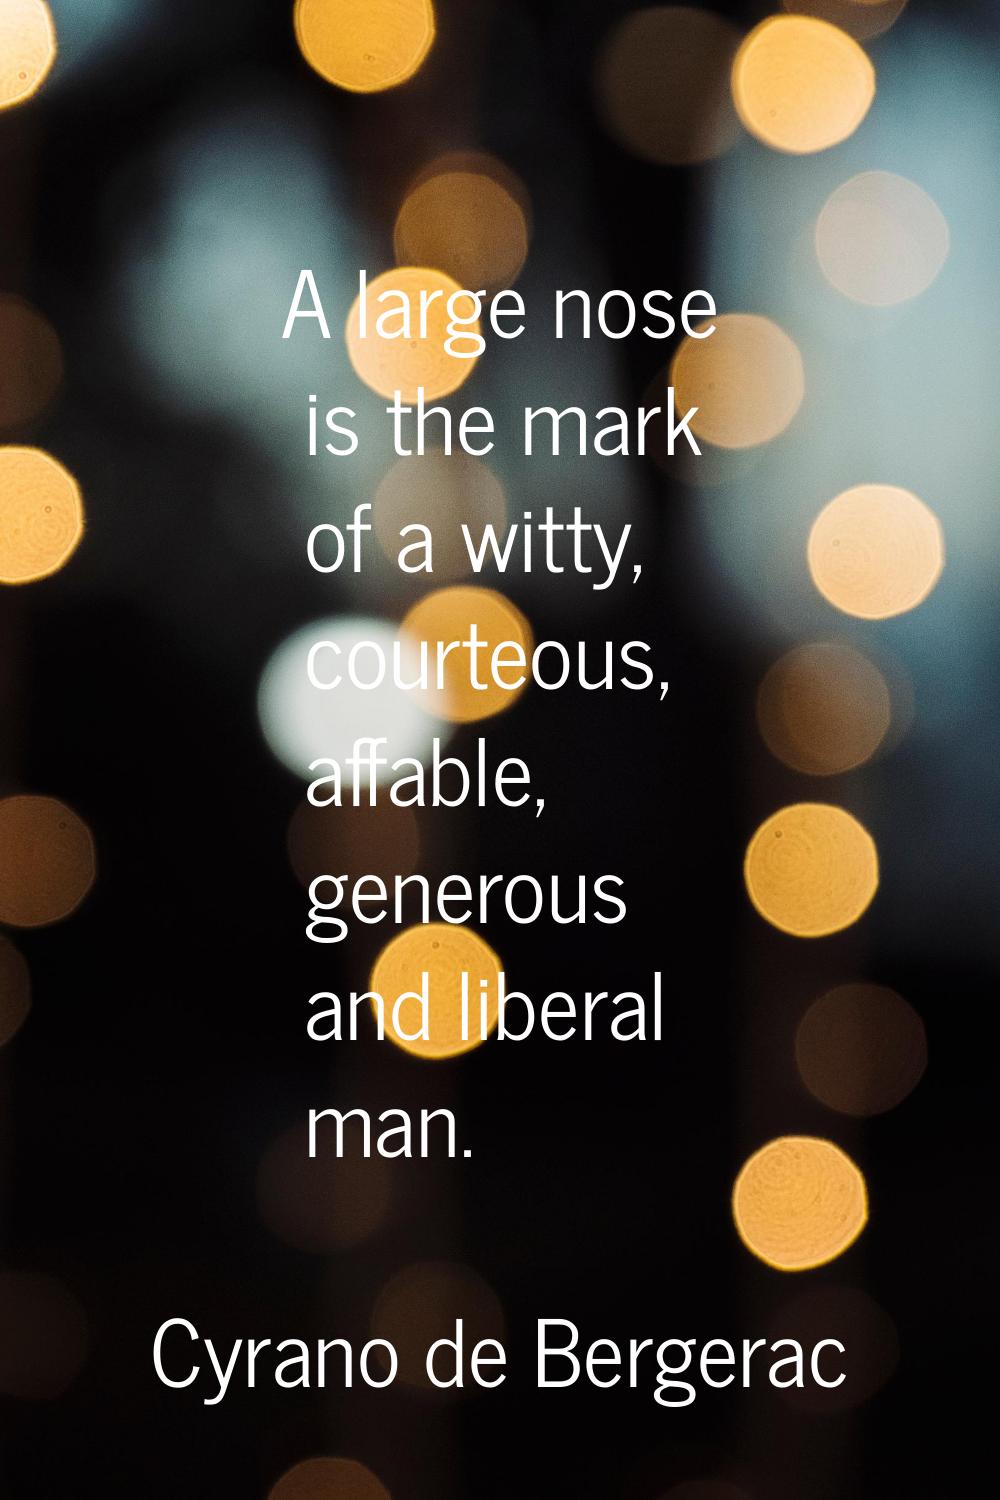 A large nose is the mark of a witty, courteous, affable, generous and liberal man.